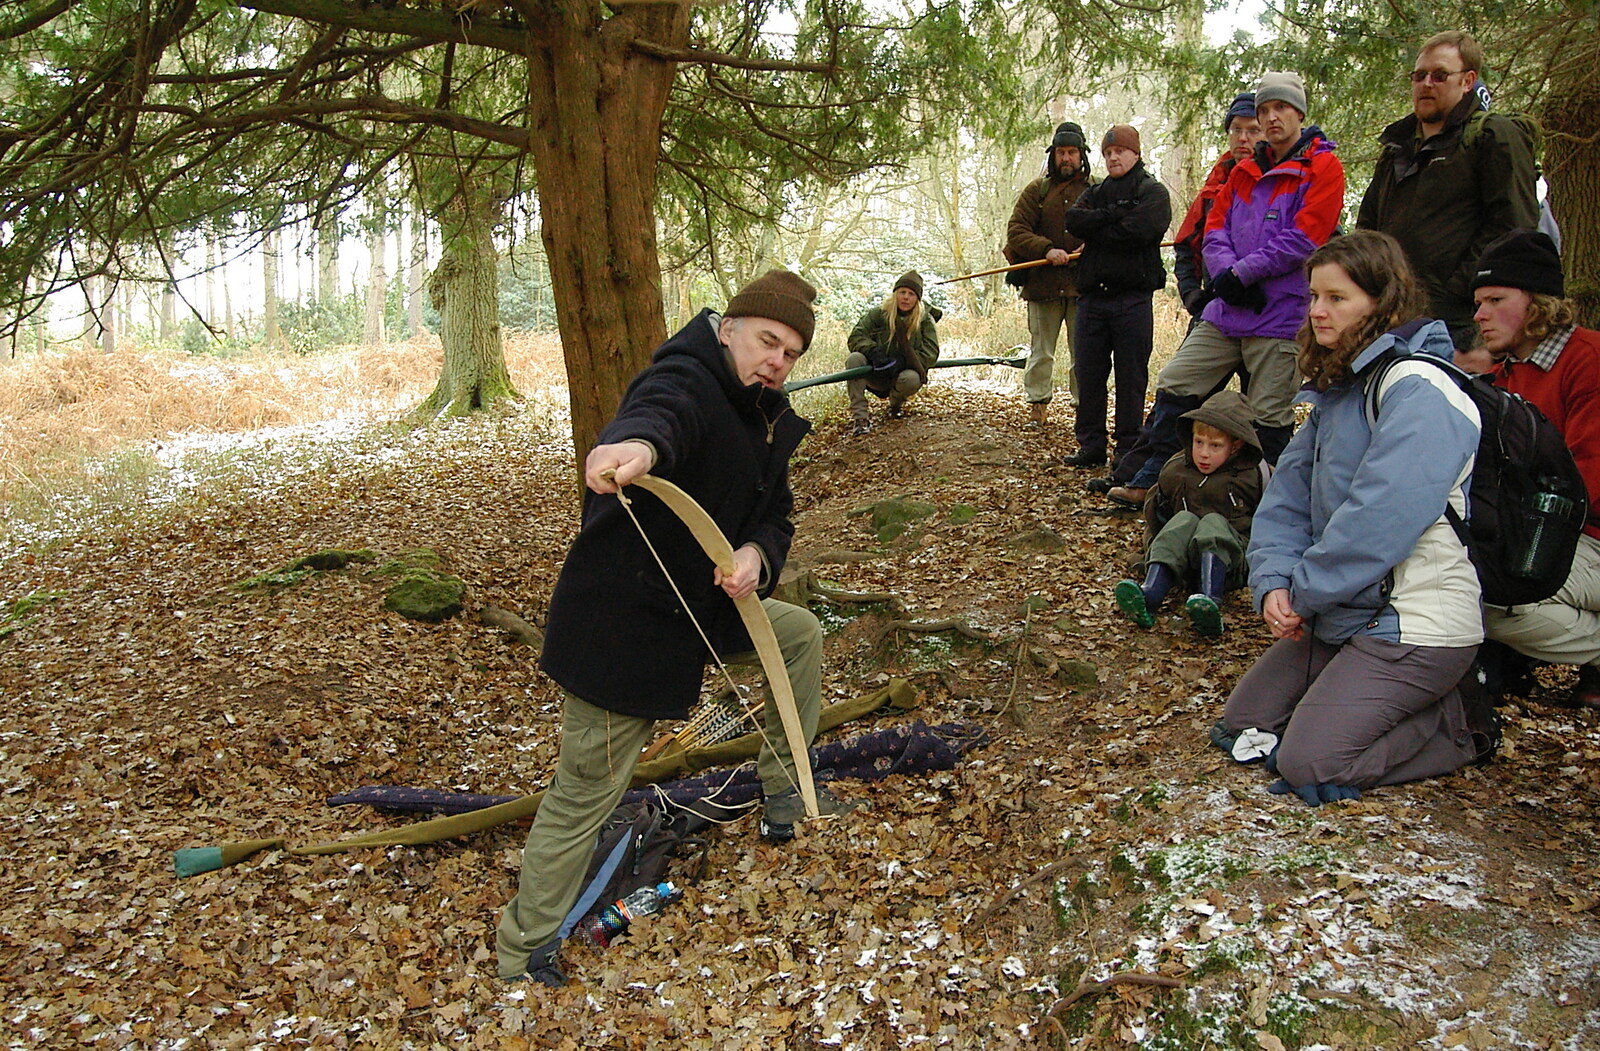 Chris Boyton introduces his bows from Walk Like a Shadow: A Day With Ray Mears, Ashdown Forest, East Sussex - 29th December 2005